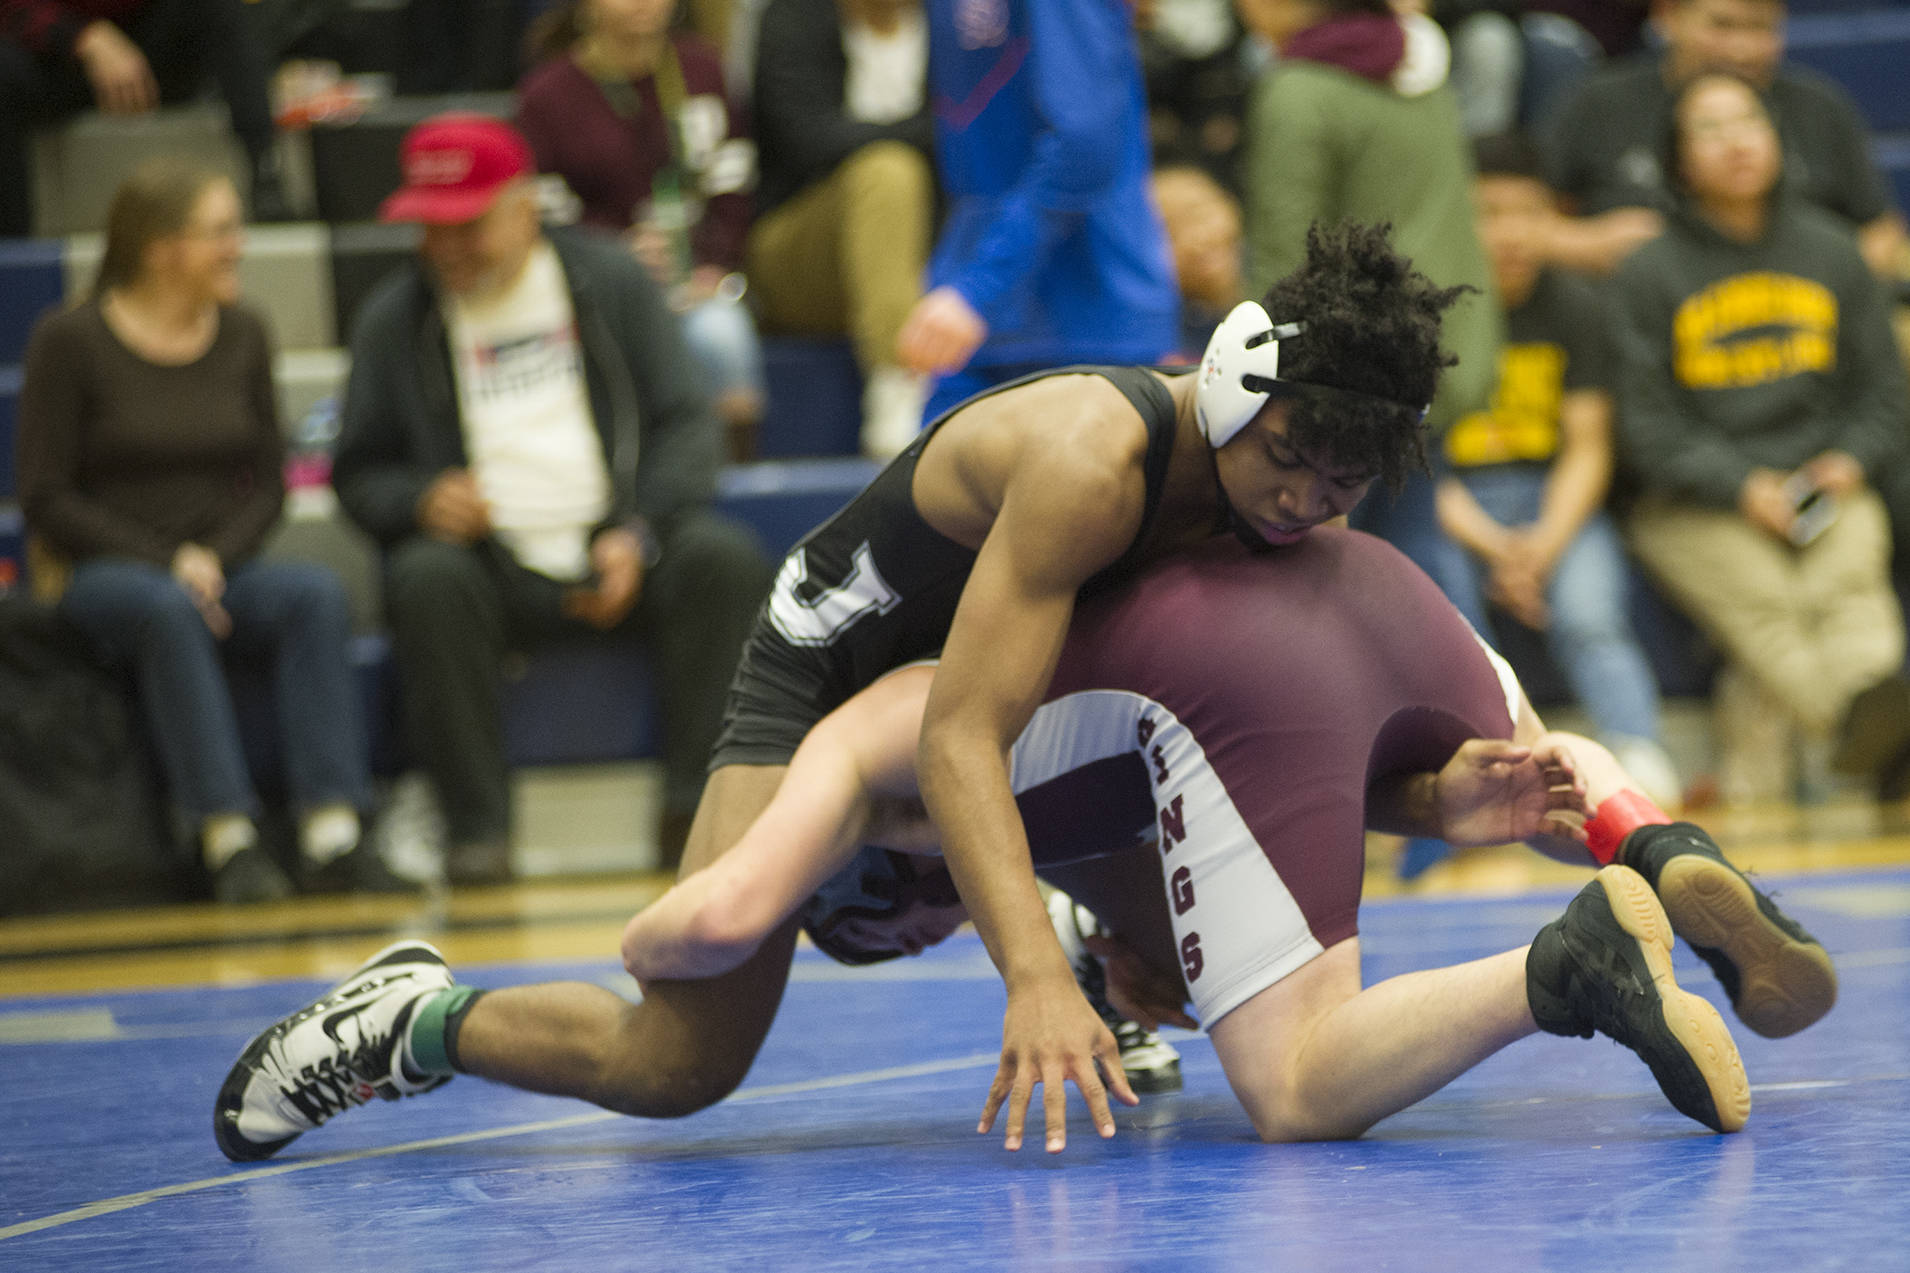 Thunder Mountain’s Jahrease Mays wrestles Ketchikan’s Matthew Rodriguez during their 125-pound finals match in the Region V Division I Wrestling Championships at TMHS on Saturday, Dec. 8, 2018. Rodriguez earned a 3-2 decision to win the region title. (Nolin Ainsworth | Juneau Empire)